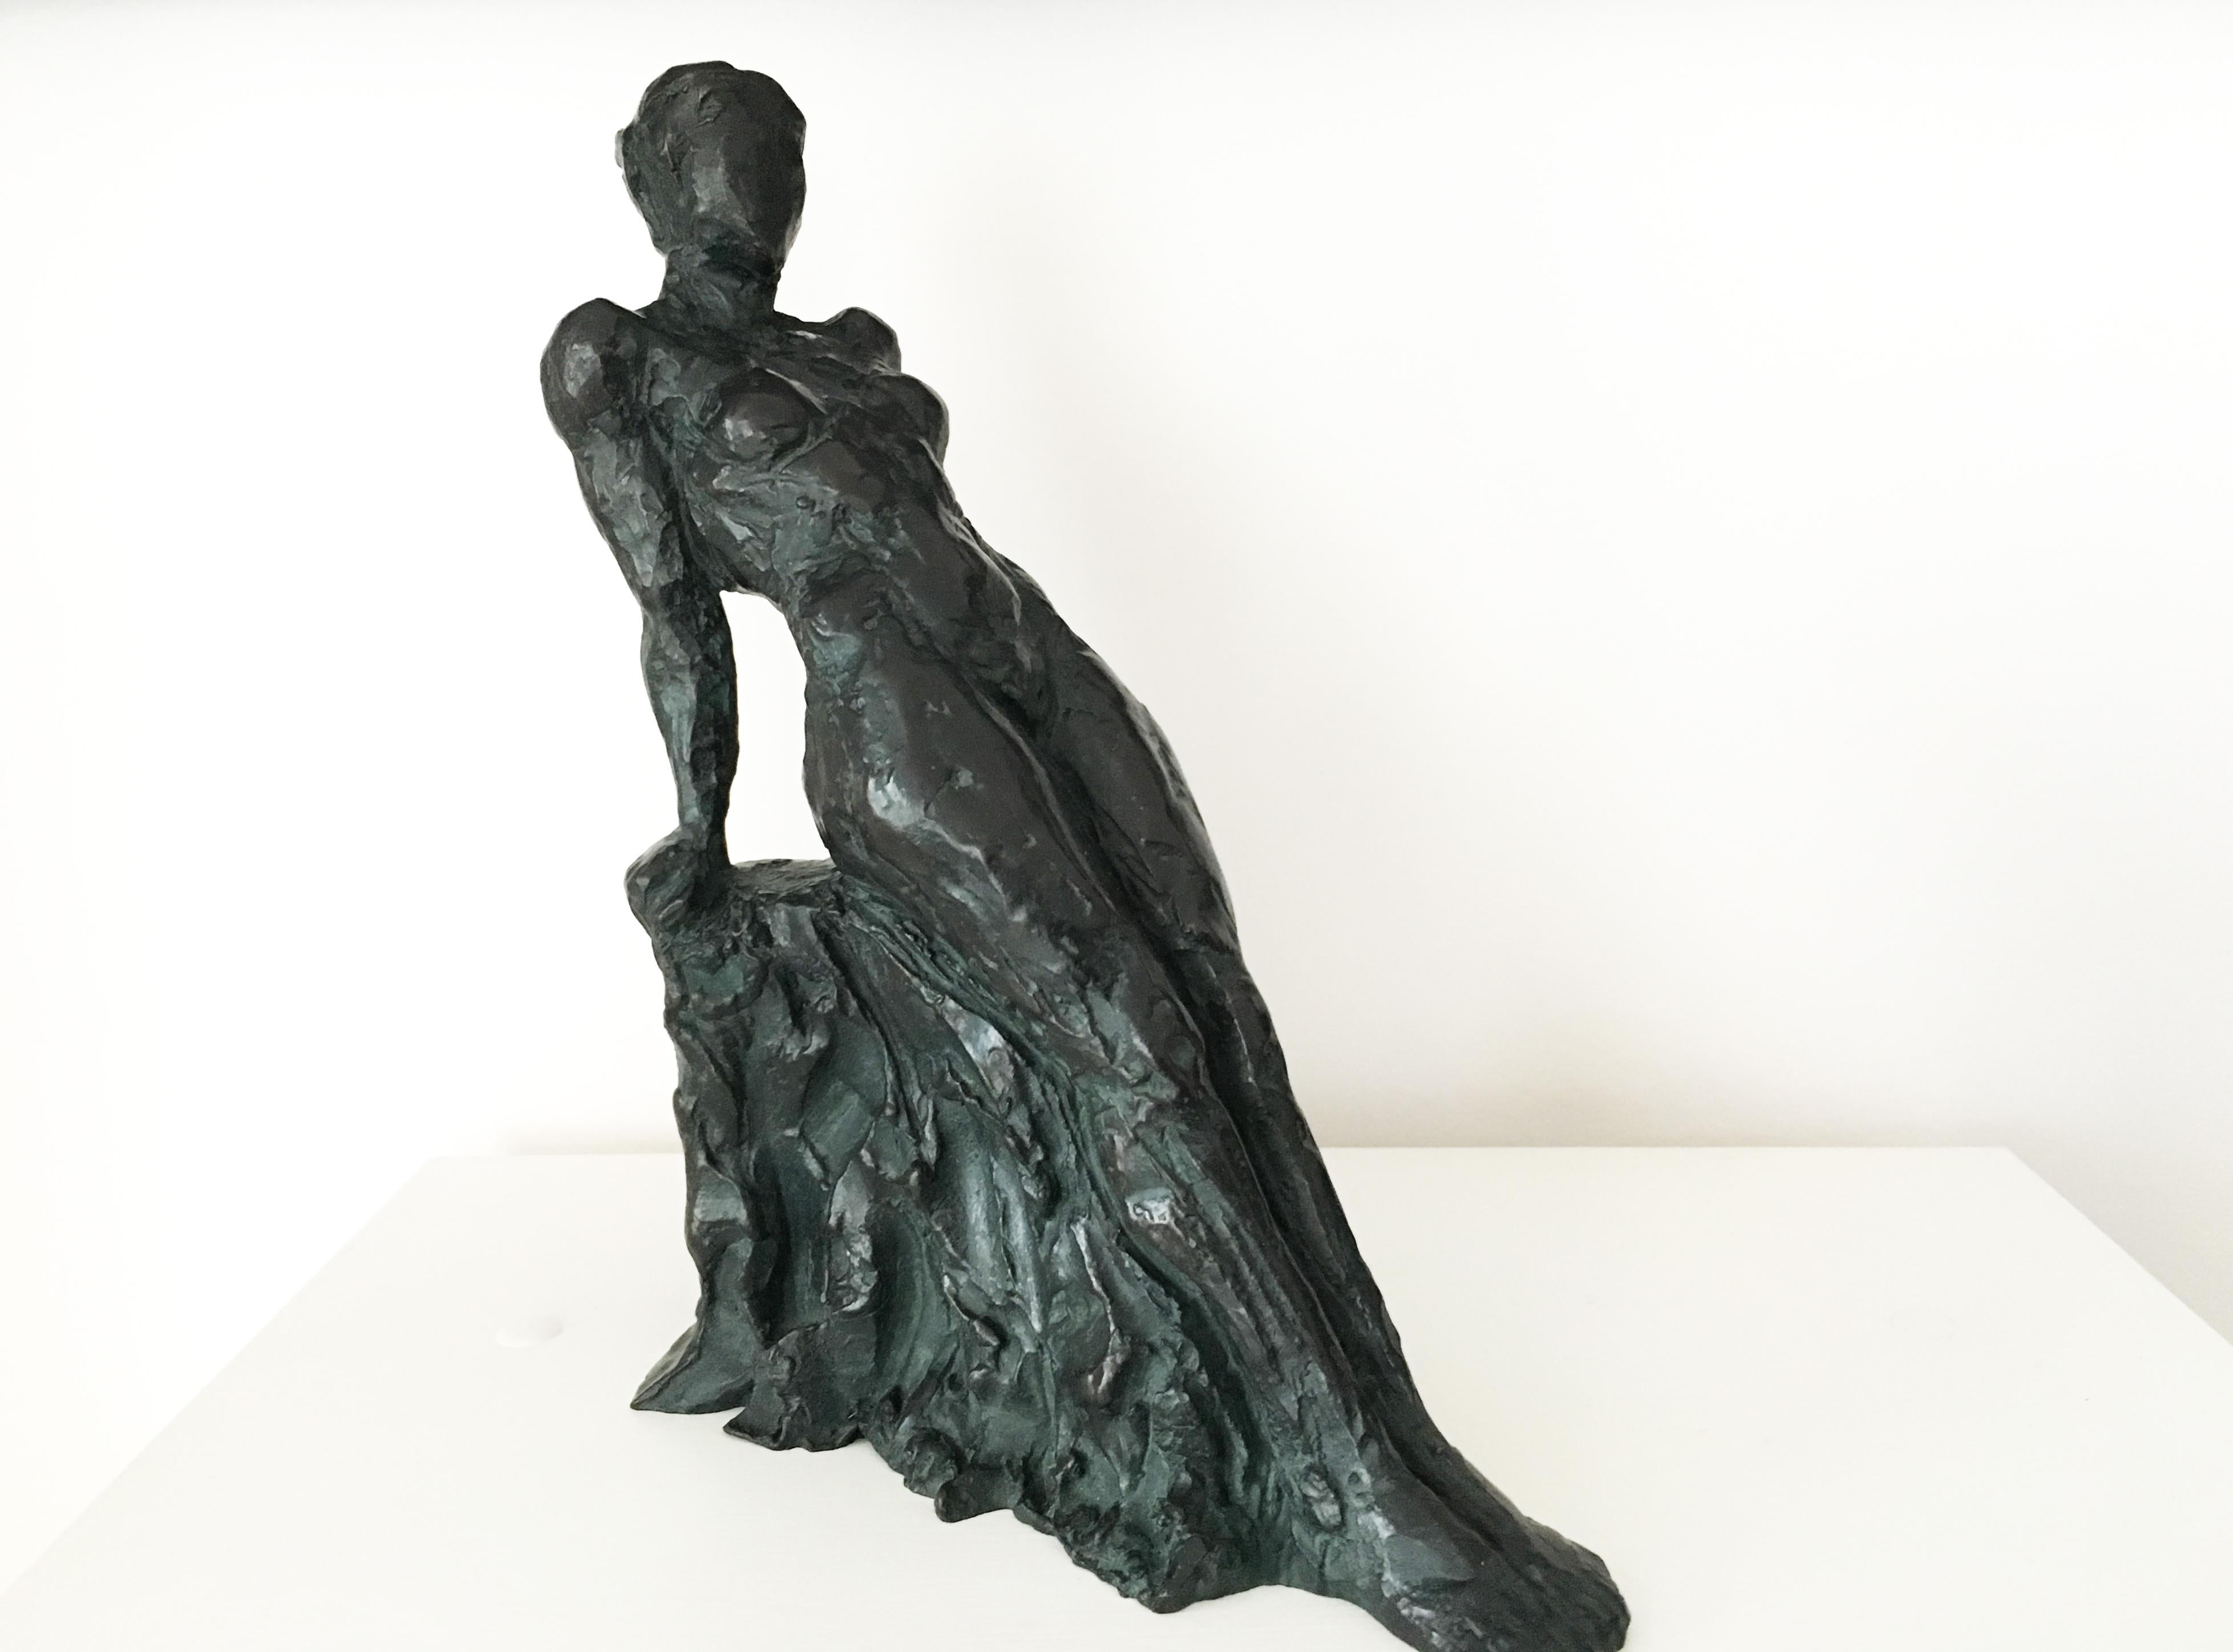 Mathilde is a bronze sculpture by contemporary artist Yann Guillon, dimensions are 27 × 21 × 9 cm (10.6 × 8.3 × 3.5 in). 
The sculpture is signed and numbered, it is part of a limited edition of 8 editions + 4 artist’s proofs, and comes with a